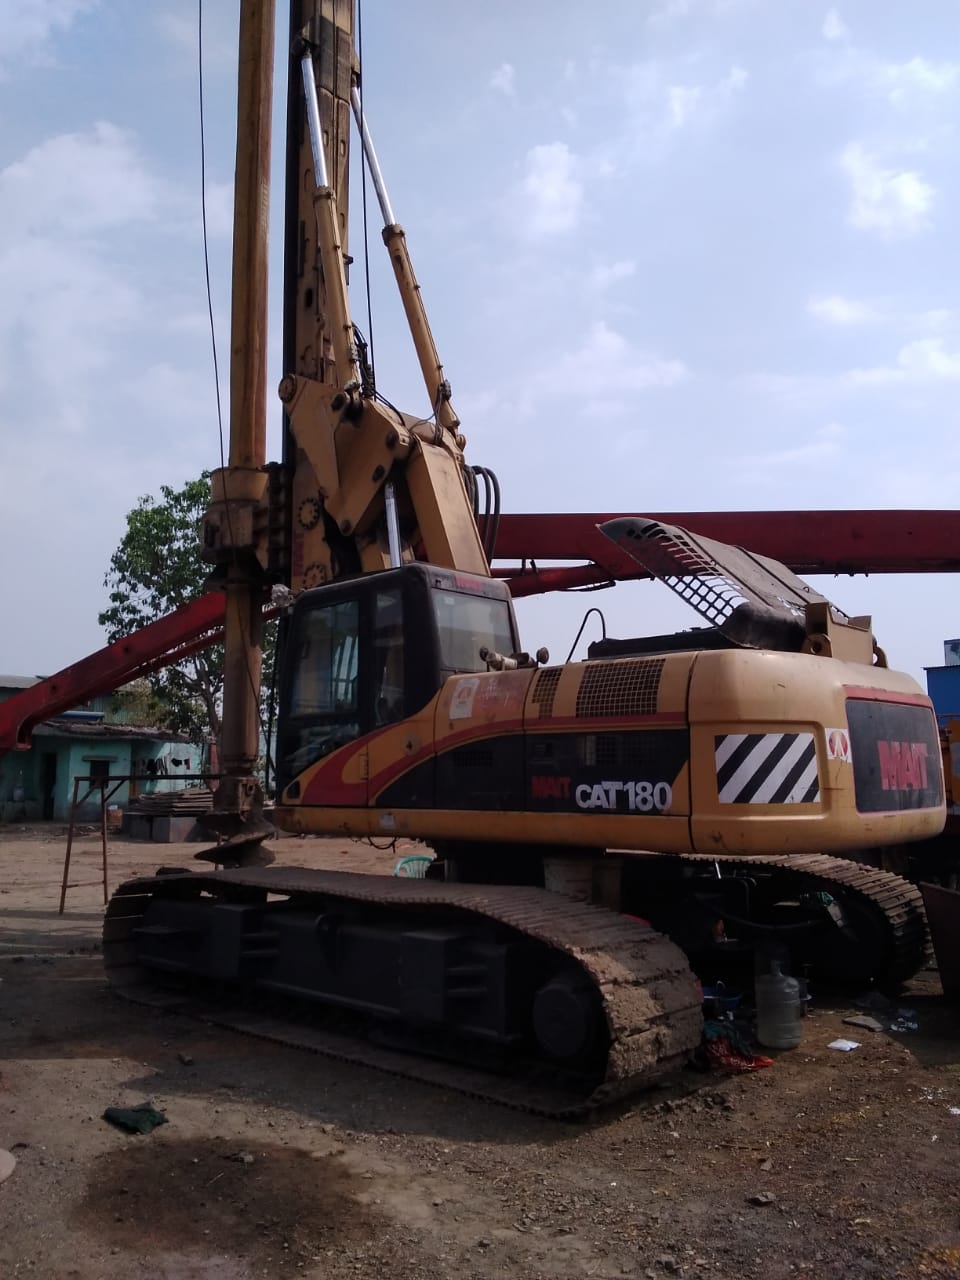 2009 model Used Mait MaiCat 180 Piling Rigs for sale in Mumbai by owners online at best price, Product ID: 449914, Image 1- Infra Bazaar